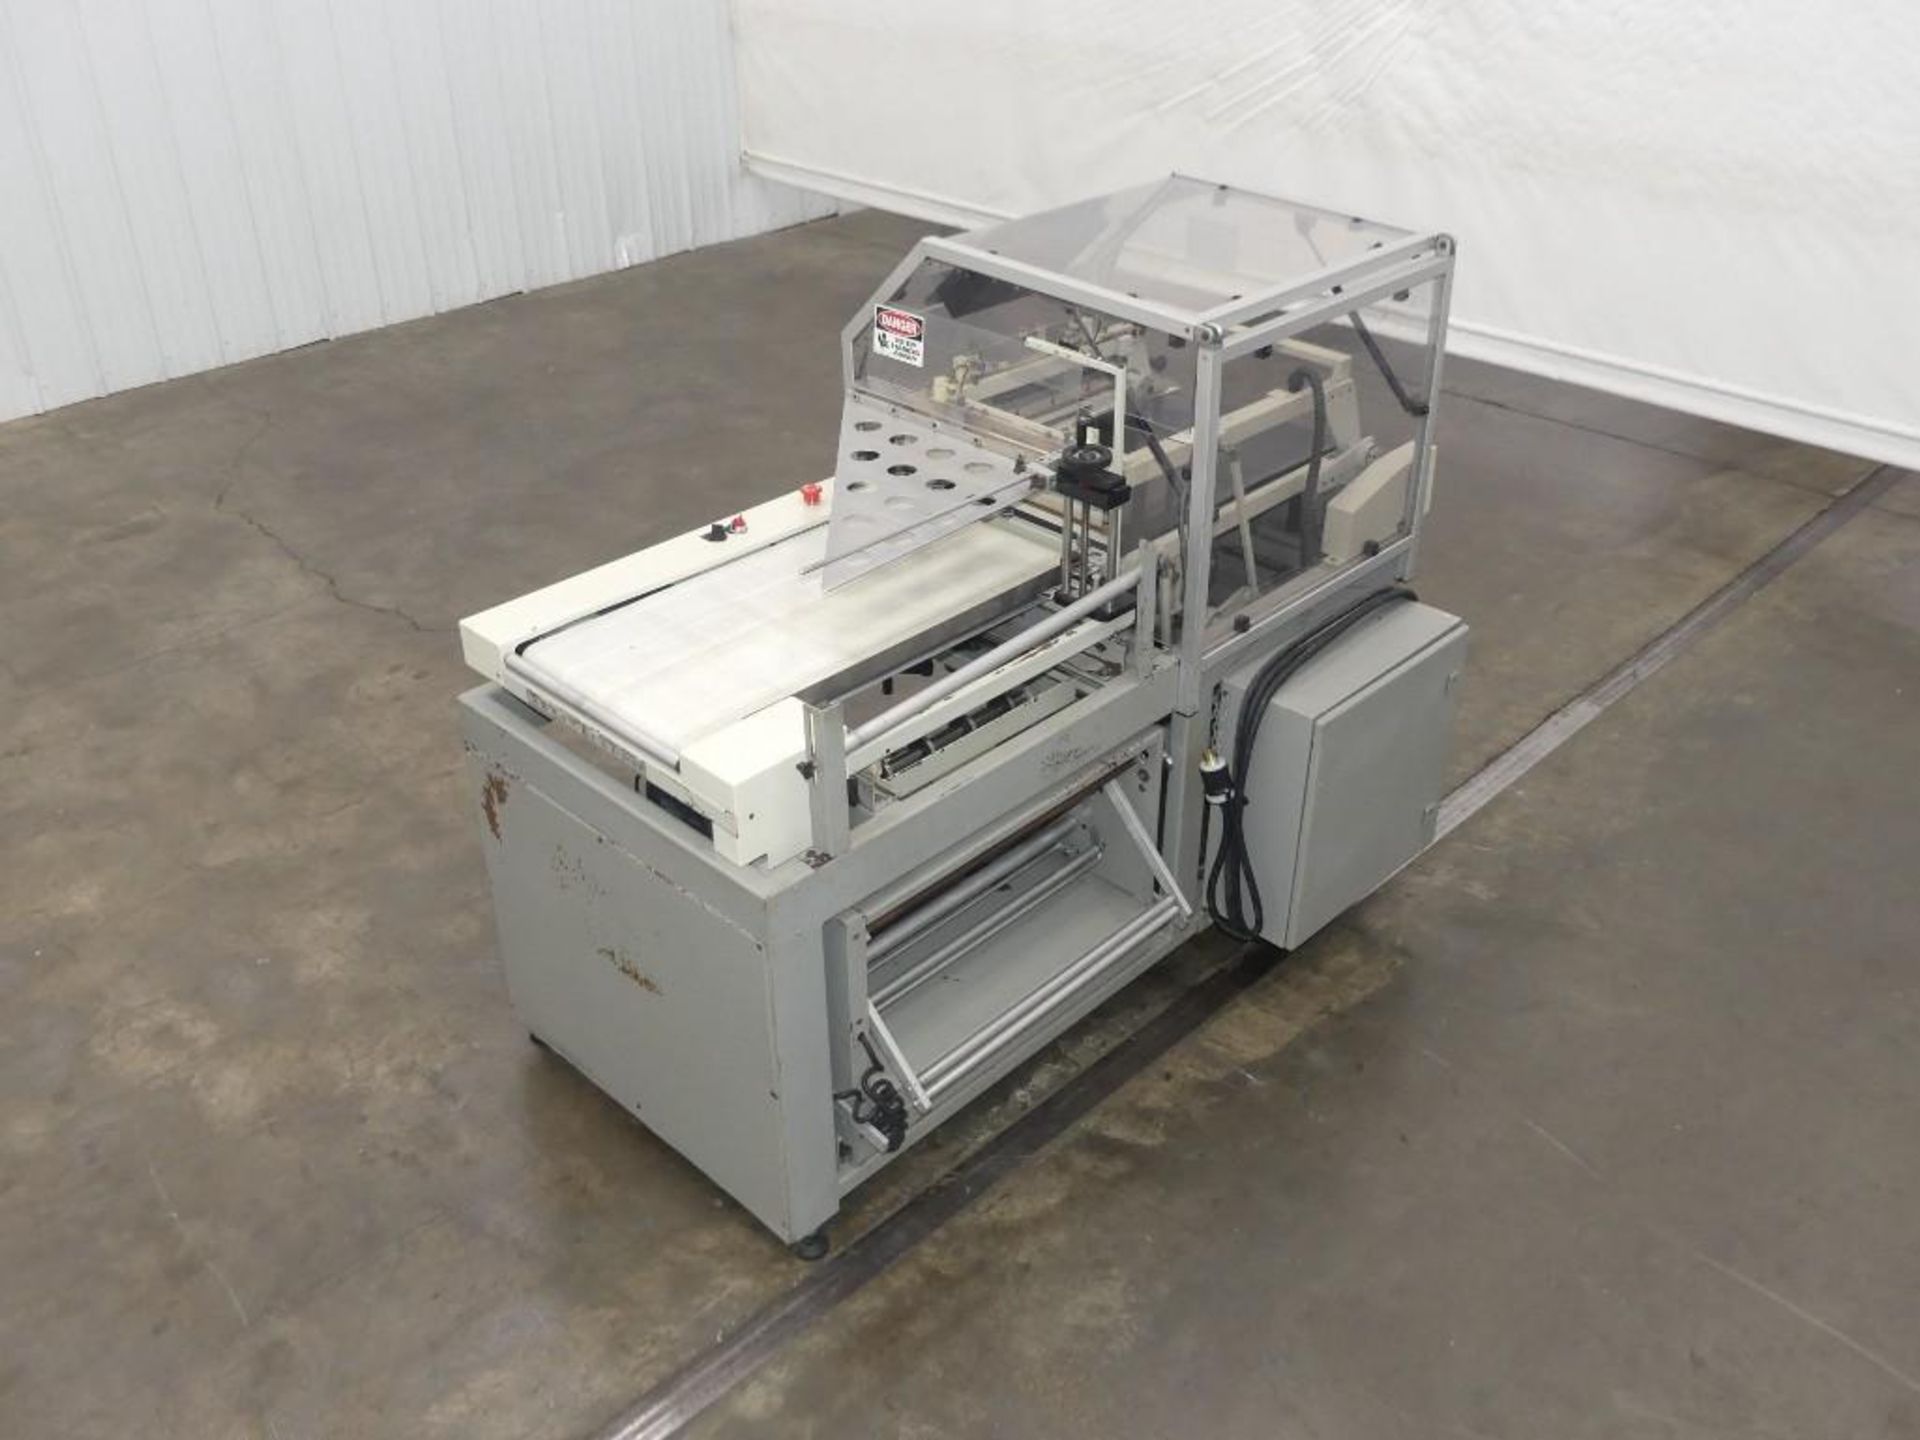 Clamco 6600 Automatic L-Bar Sealer with 18" x 23.5" Seal Area - Image 4 of 22